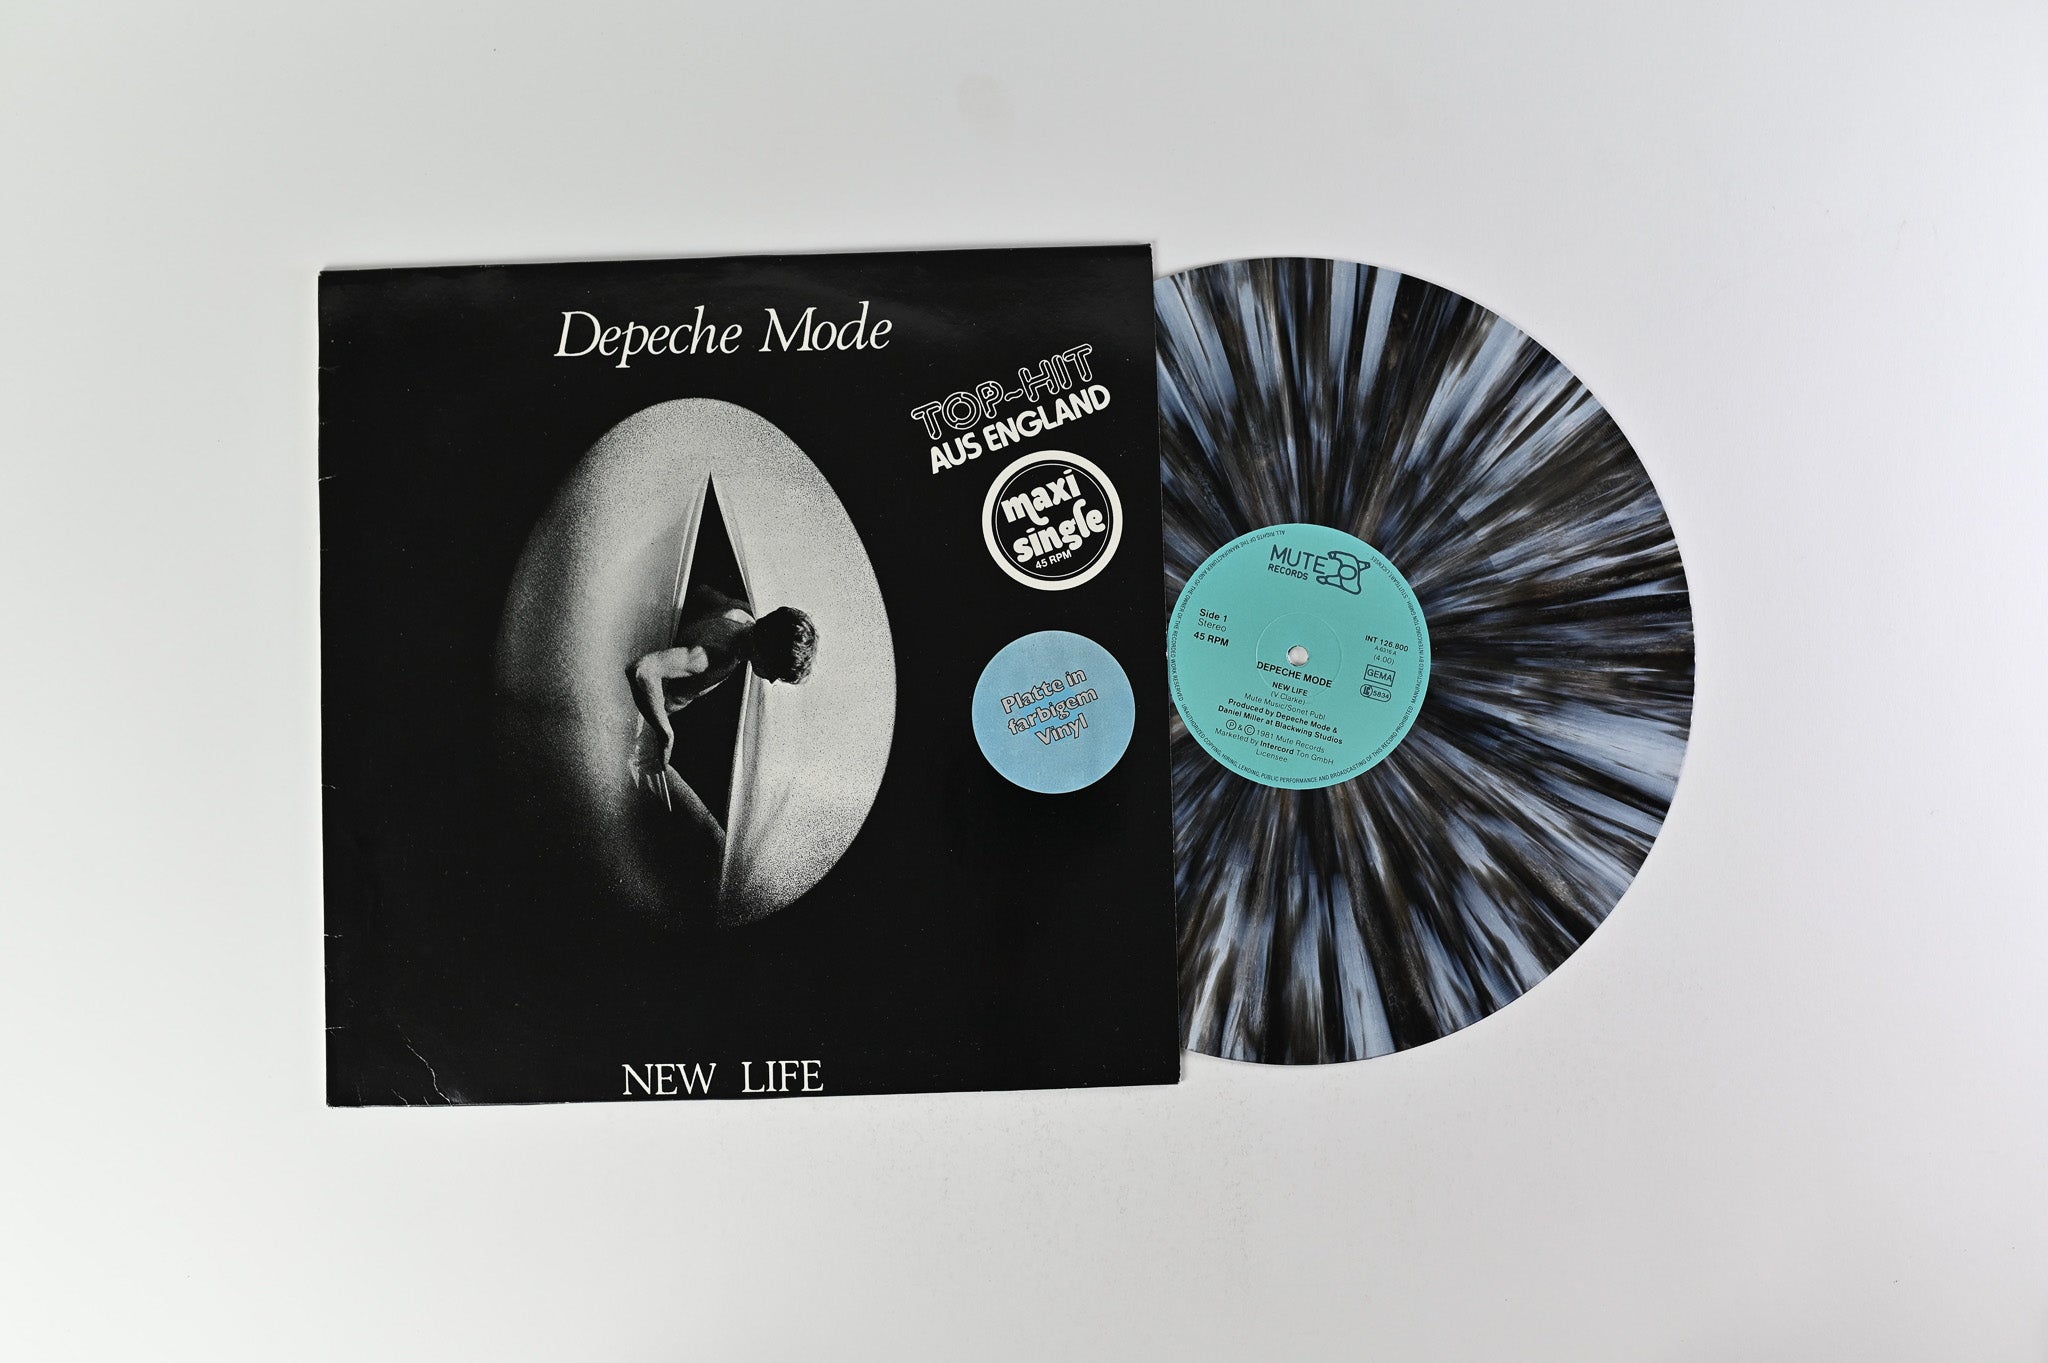 Depeche Mode - New Life on Mute German 45 RPM 12" Single Grey Marbled Reissue